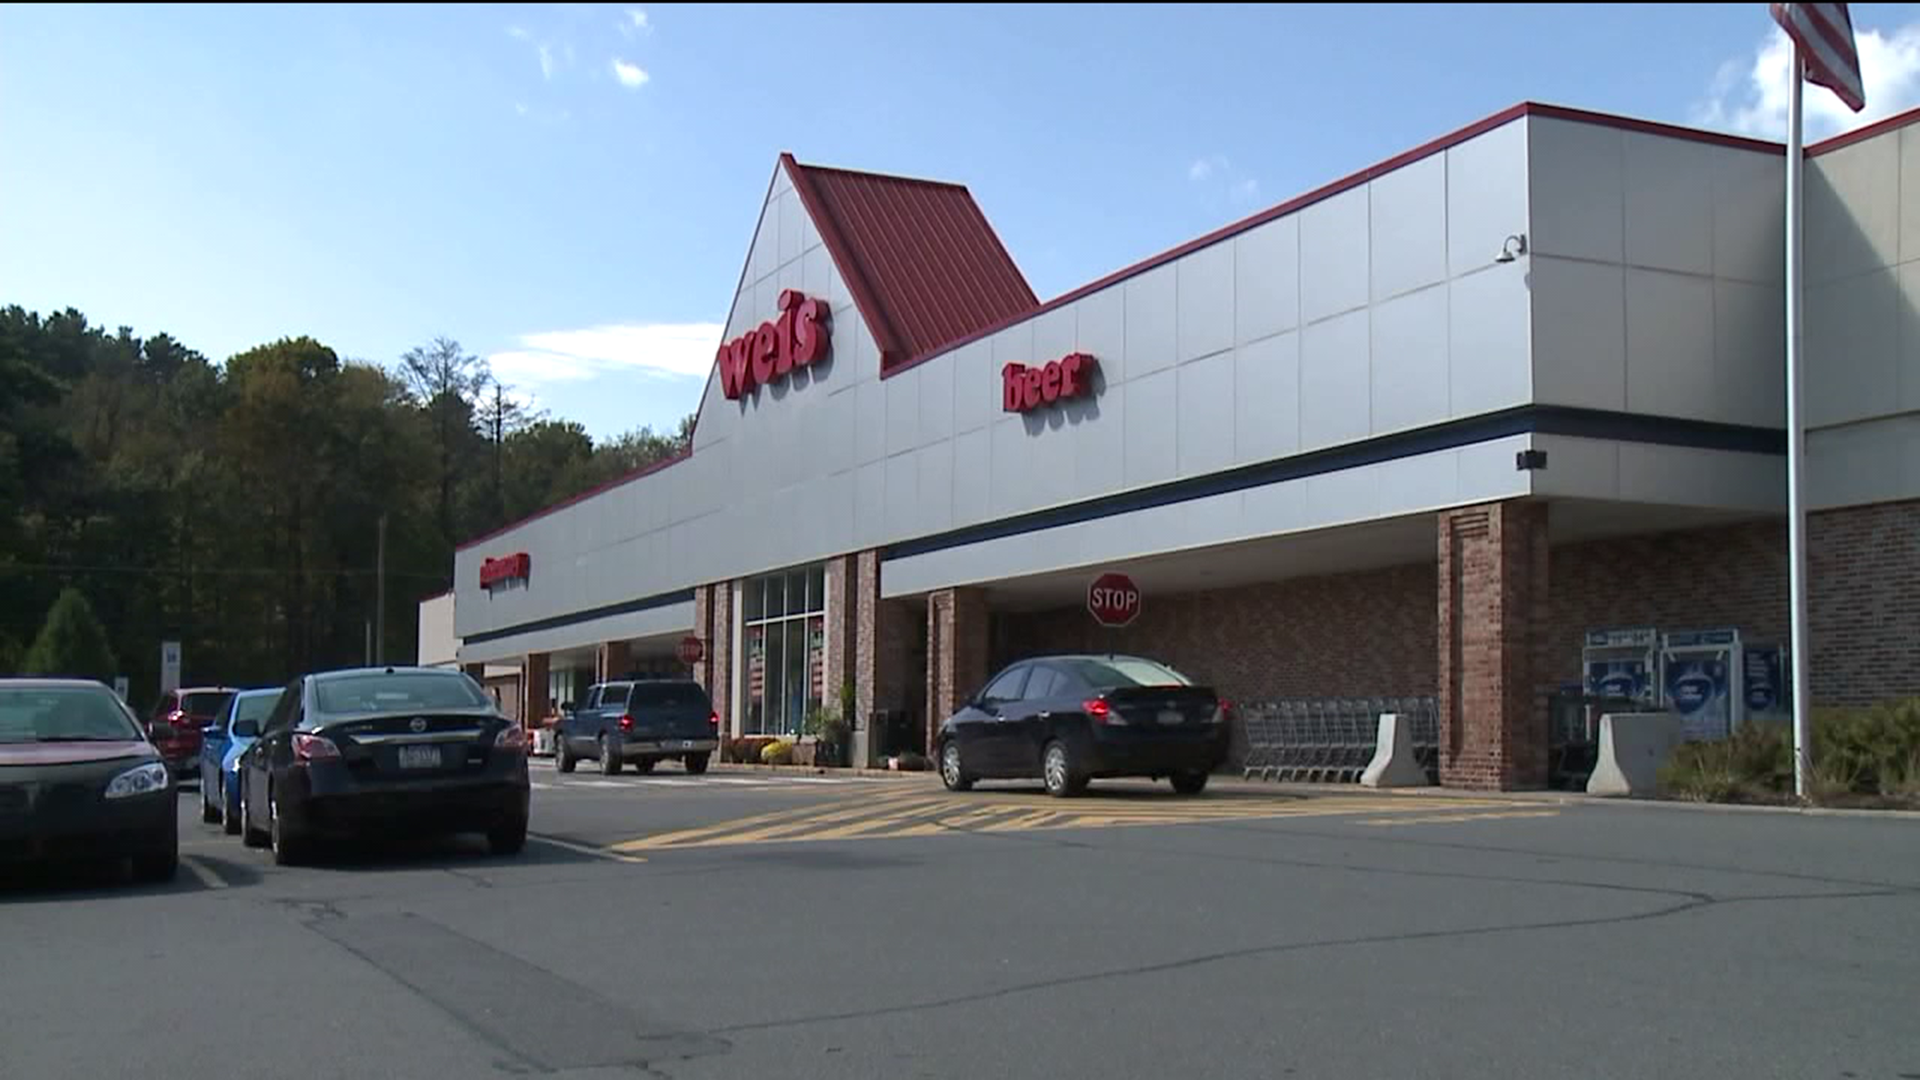 Weis Markets is also hiring new employees for its stores and warehouses.